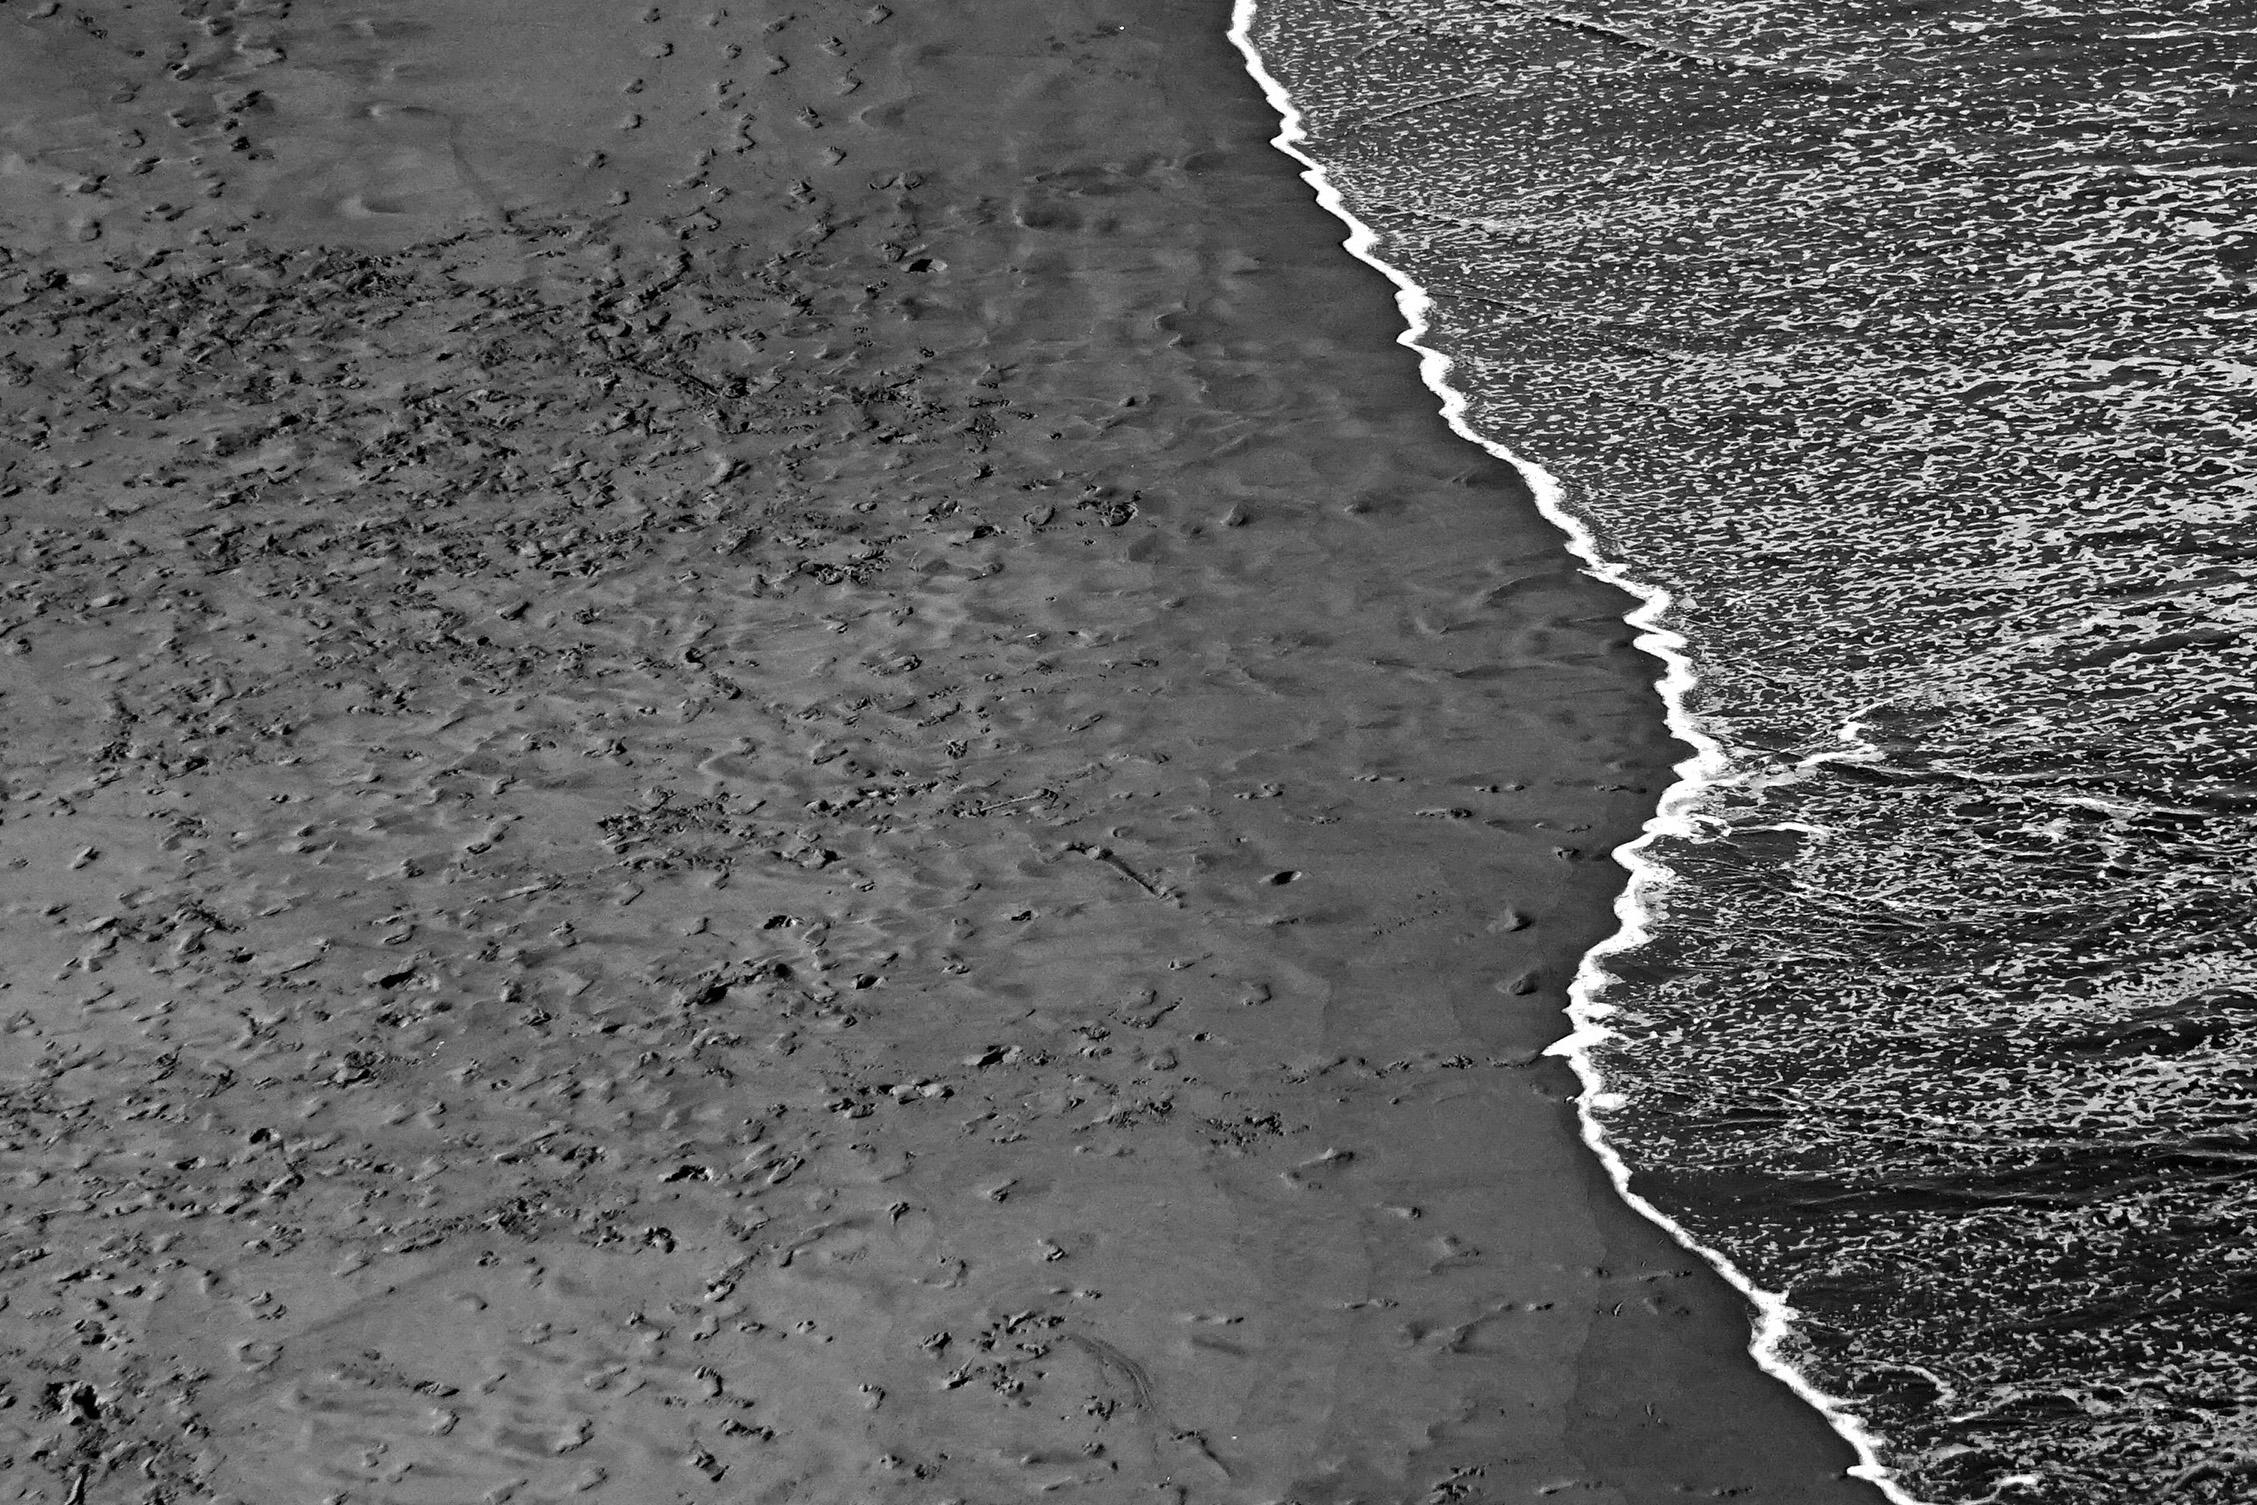 Calm Costa Rica Shore, Minimal Large Black and White Giclée Photograph Seascape For Sale 2